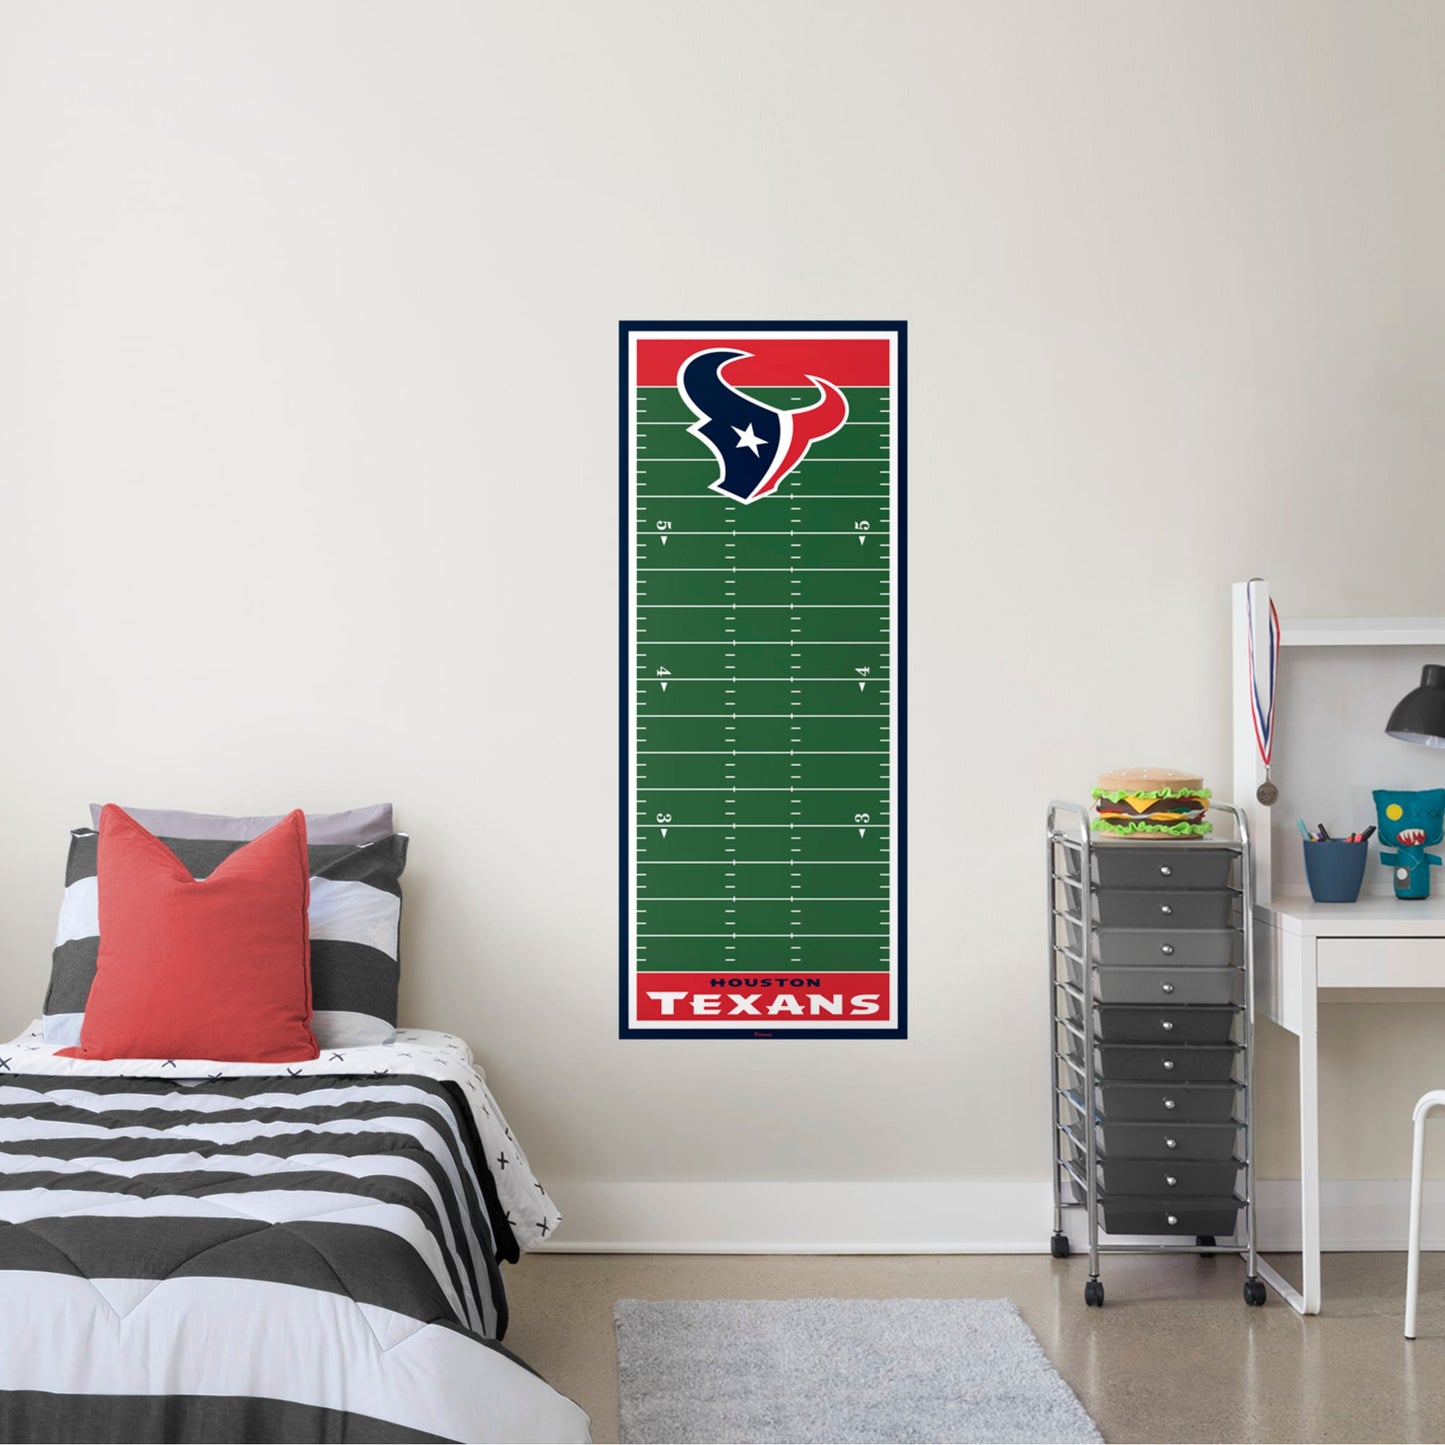 Houston Texans: Growth Chart - Officially Licensed NFL Removable Wall Graphic